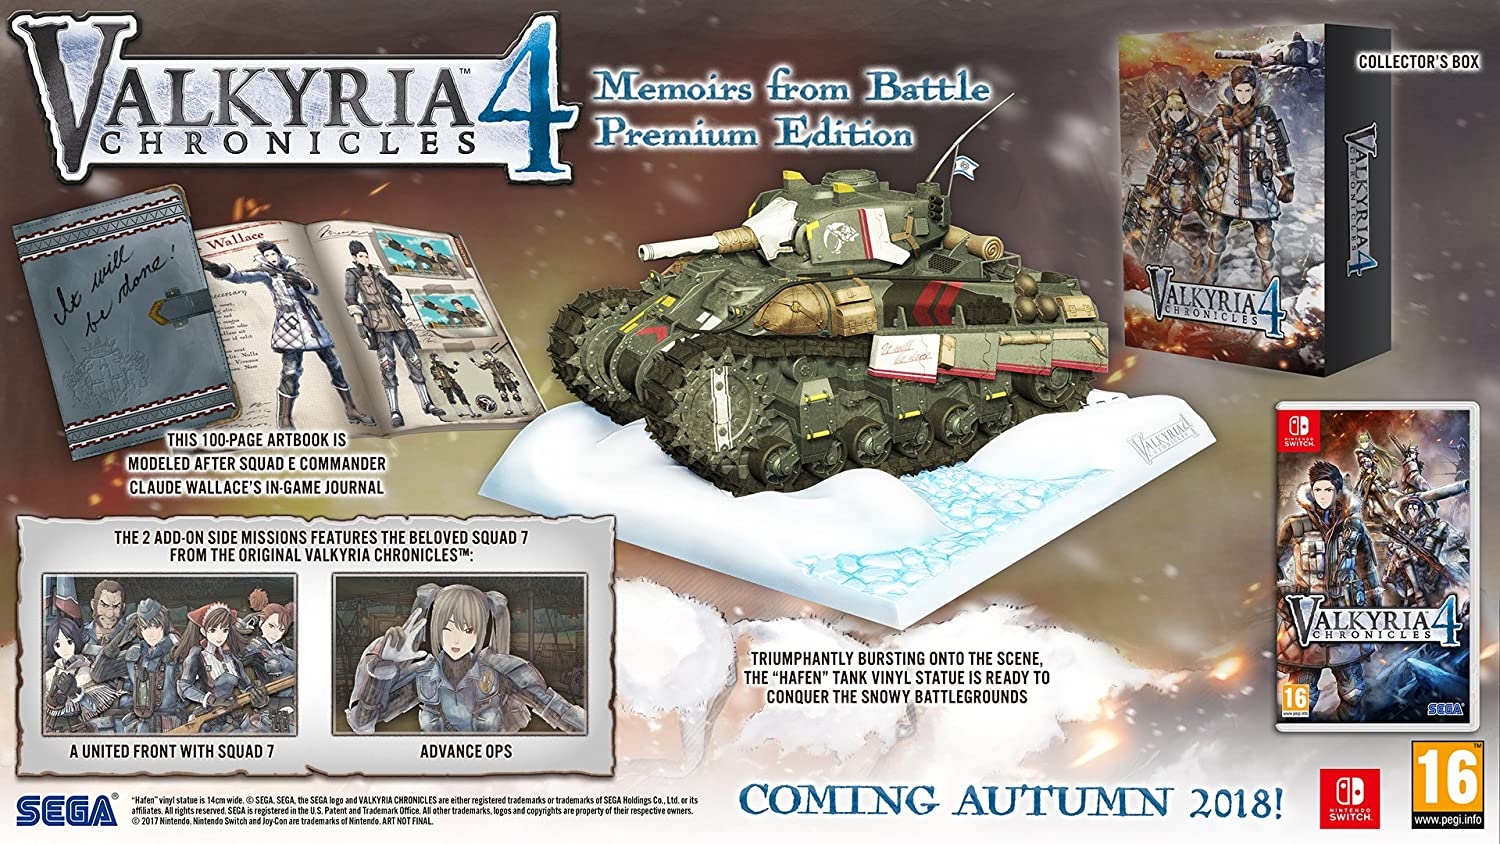 Valkyria Chronicles 4: Memoirs from Battle Premium Edition (Nintendo Switch)